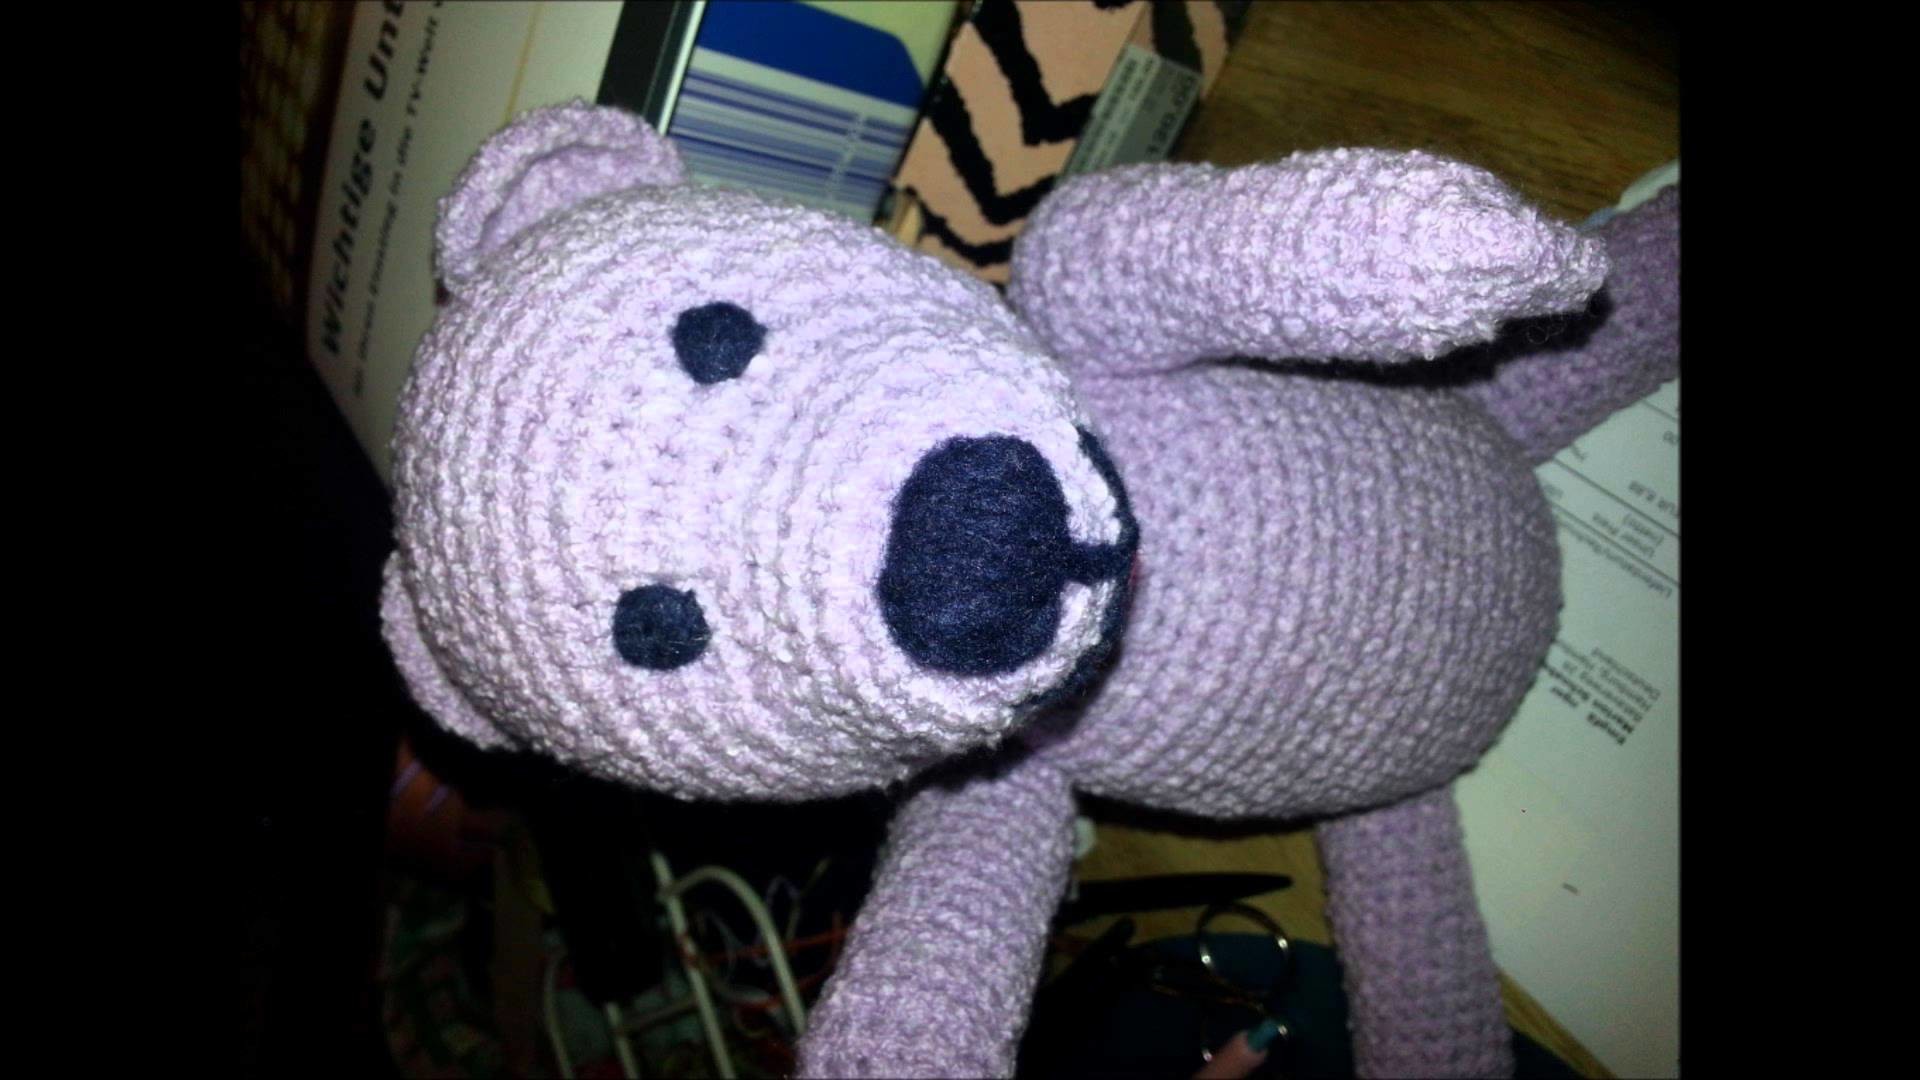 How to - Crochet a teddy - the making - head, arms, legs